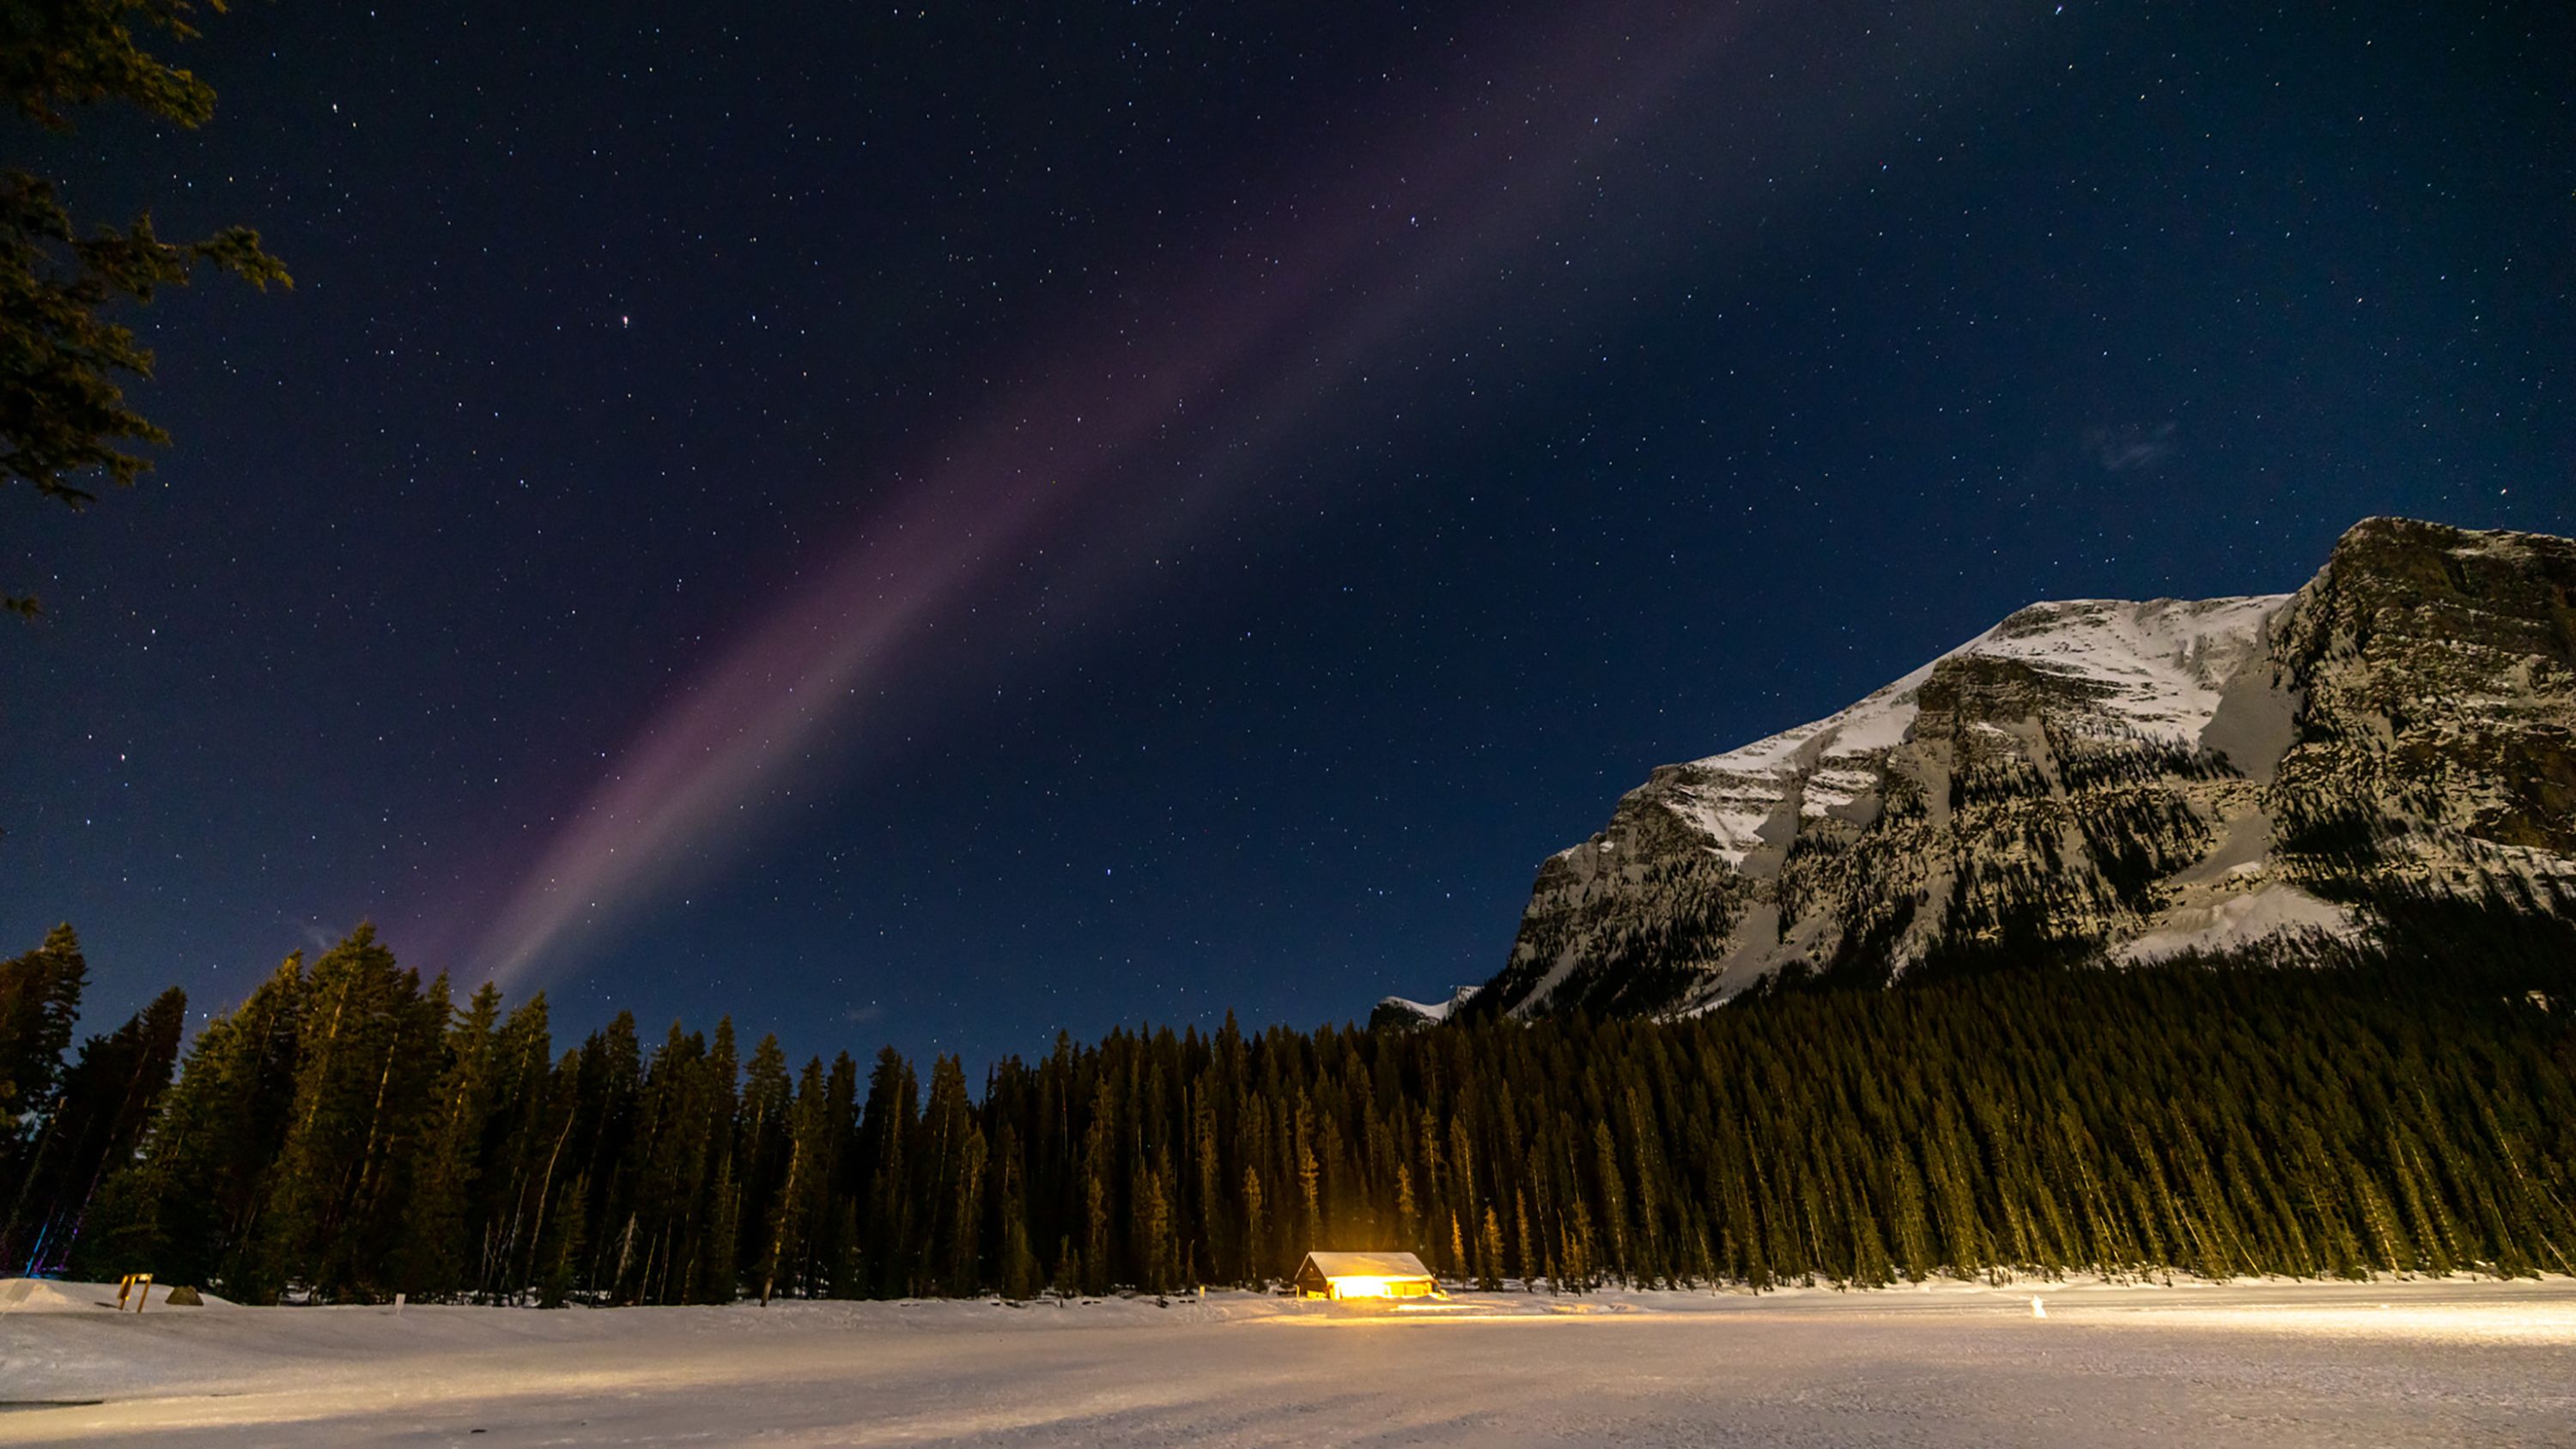 Steve: The aurora-like light show you can help research